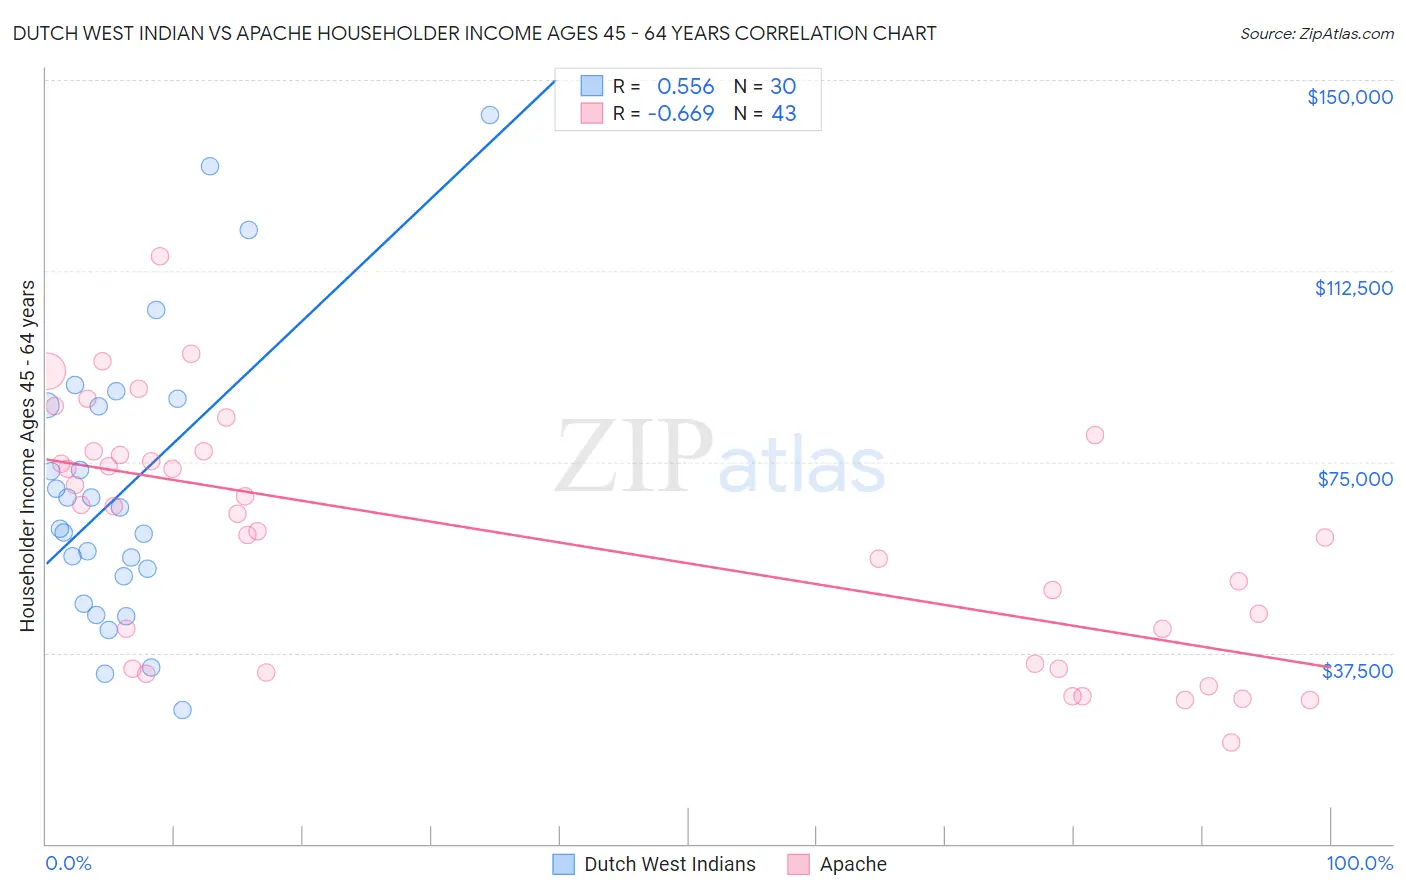 Dutch West Indian vs Apache Householder Income Ages 45 - 64 years